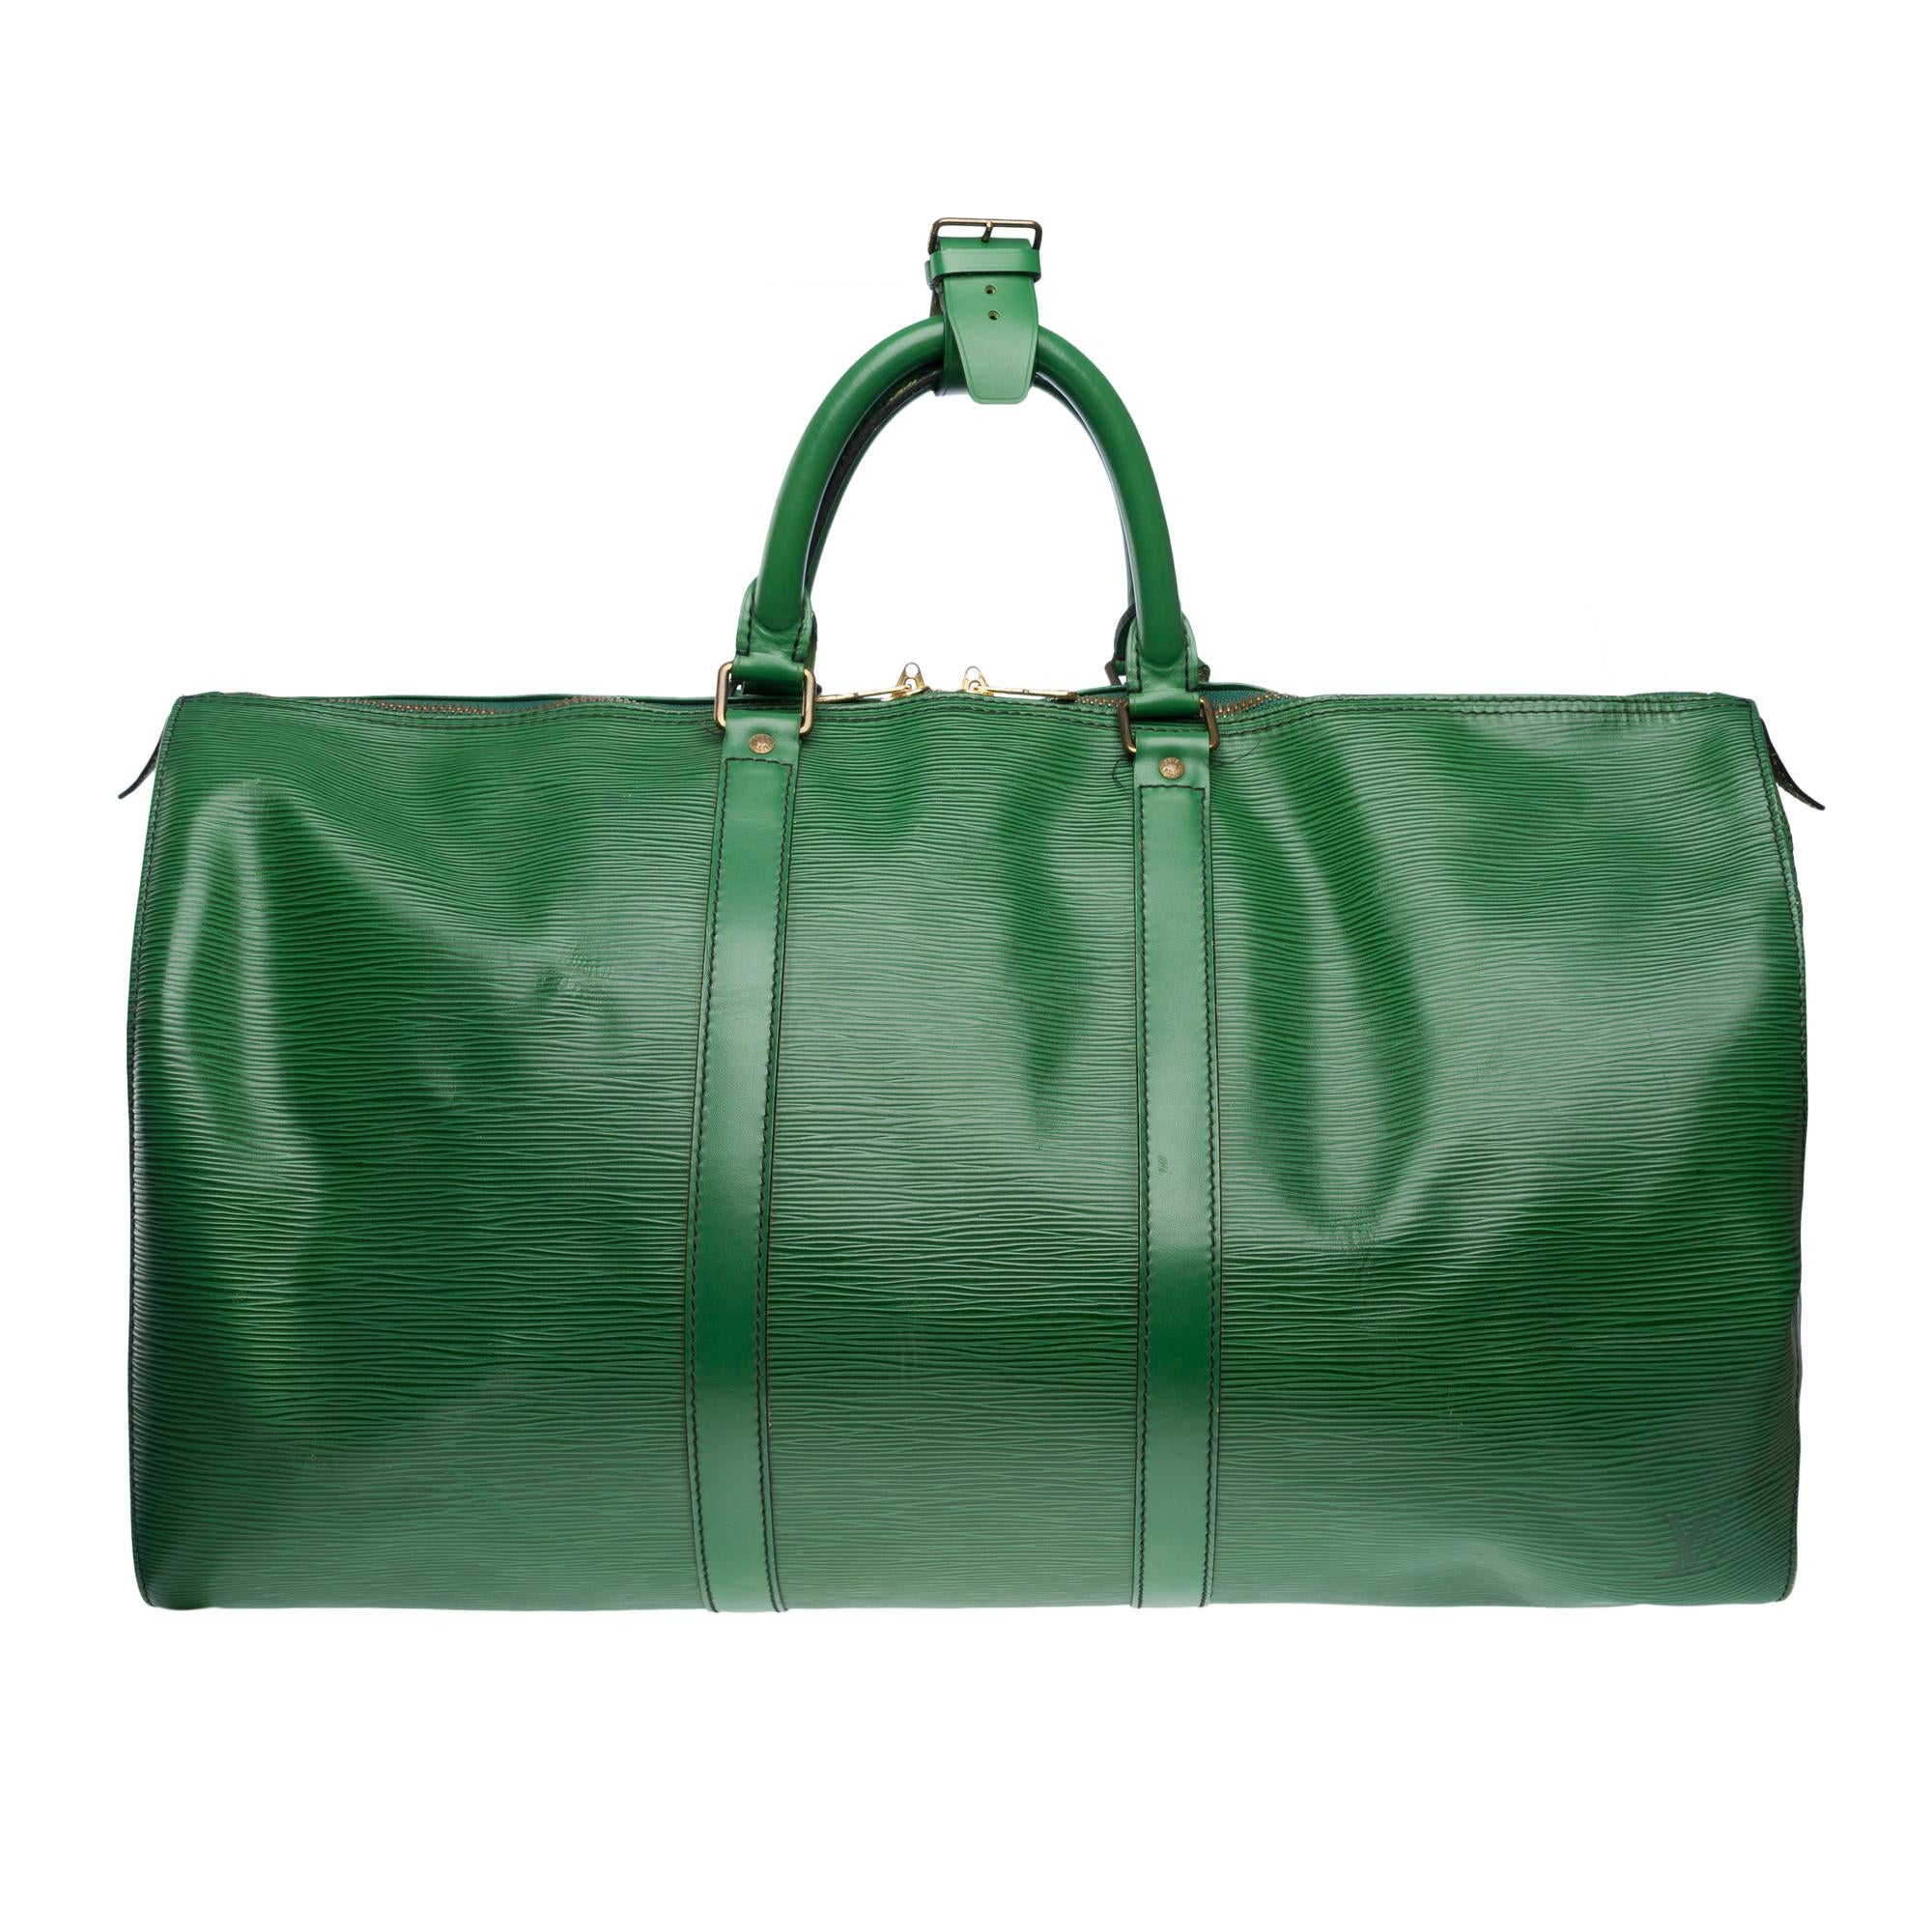 Louis Vuitton Keepall 50 Travel bag in Green épi leather, GHW In Good Condition For Sale In Paris, IDF